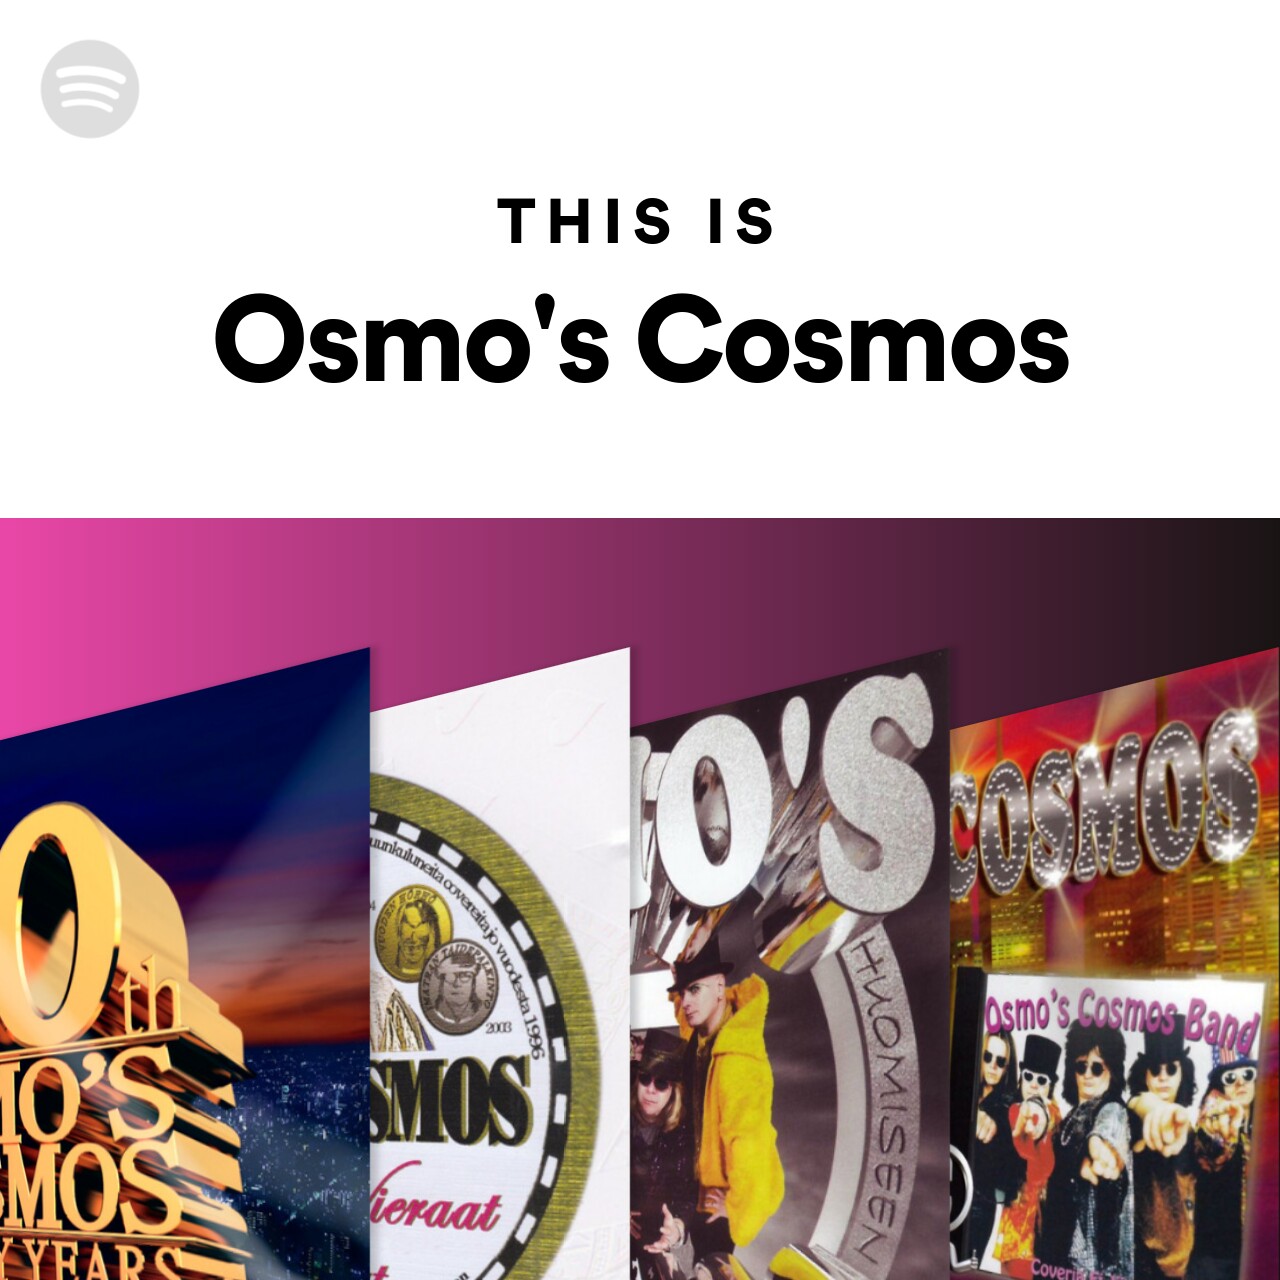 This Is Osmo's Cosmos